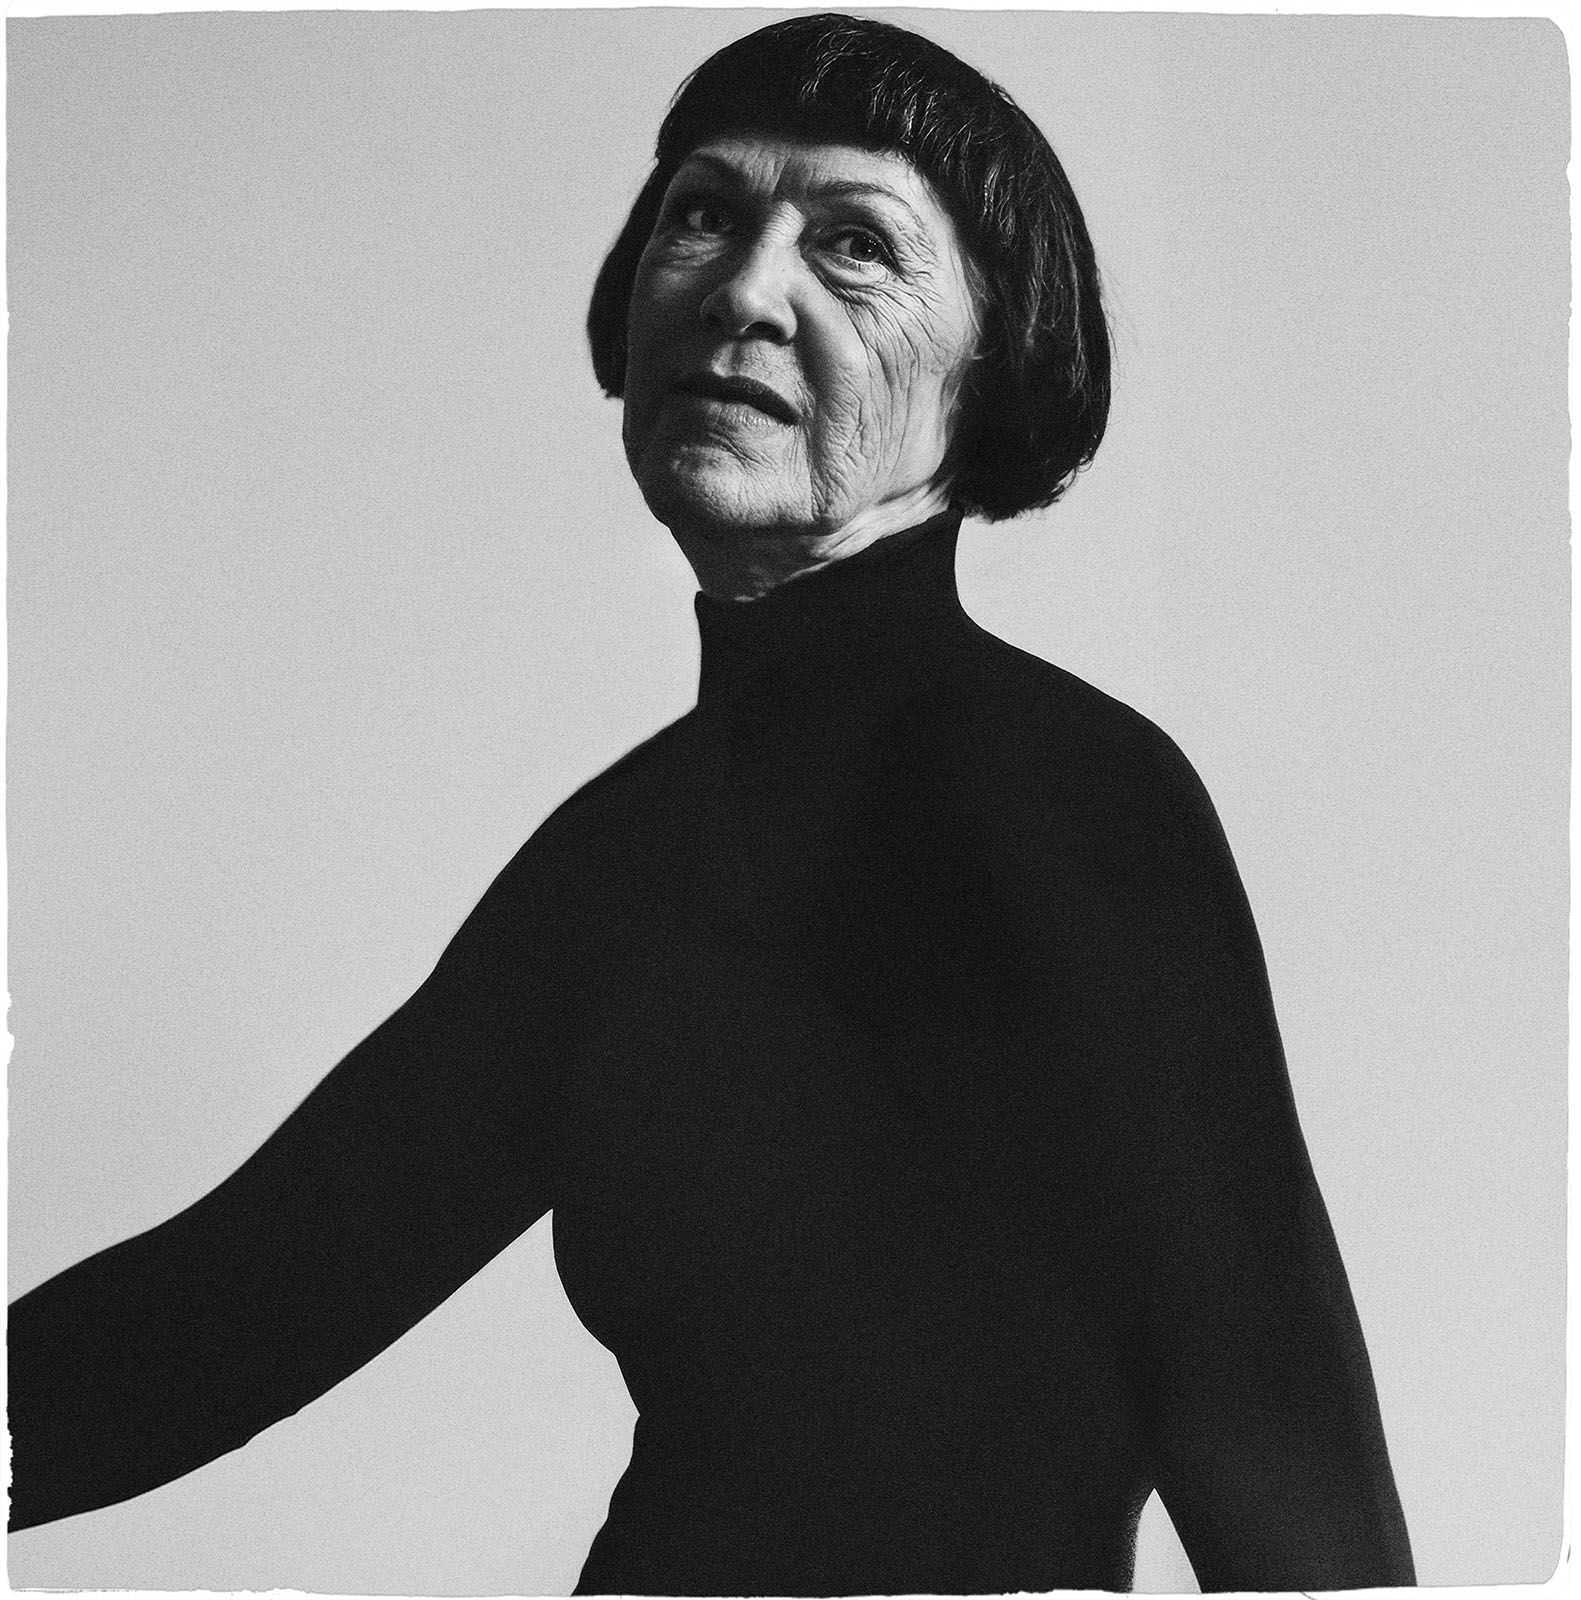 A monochrome portrait of an elderly woman with short dark hair, wearing a black turtleneck. she is looking to her right with a thoughtful expression.